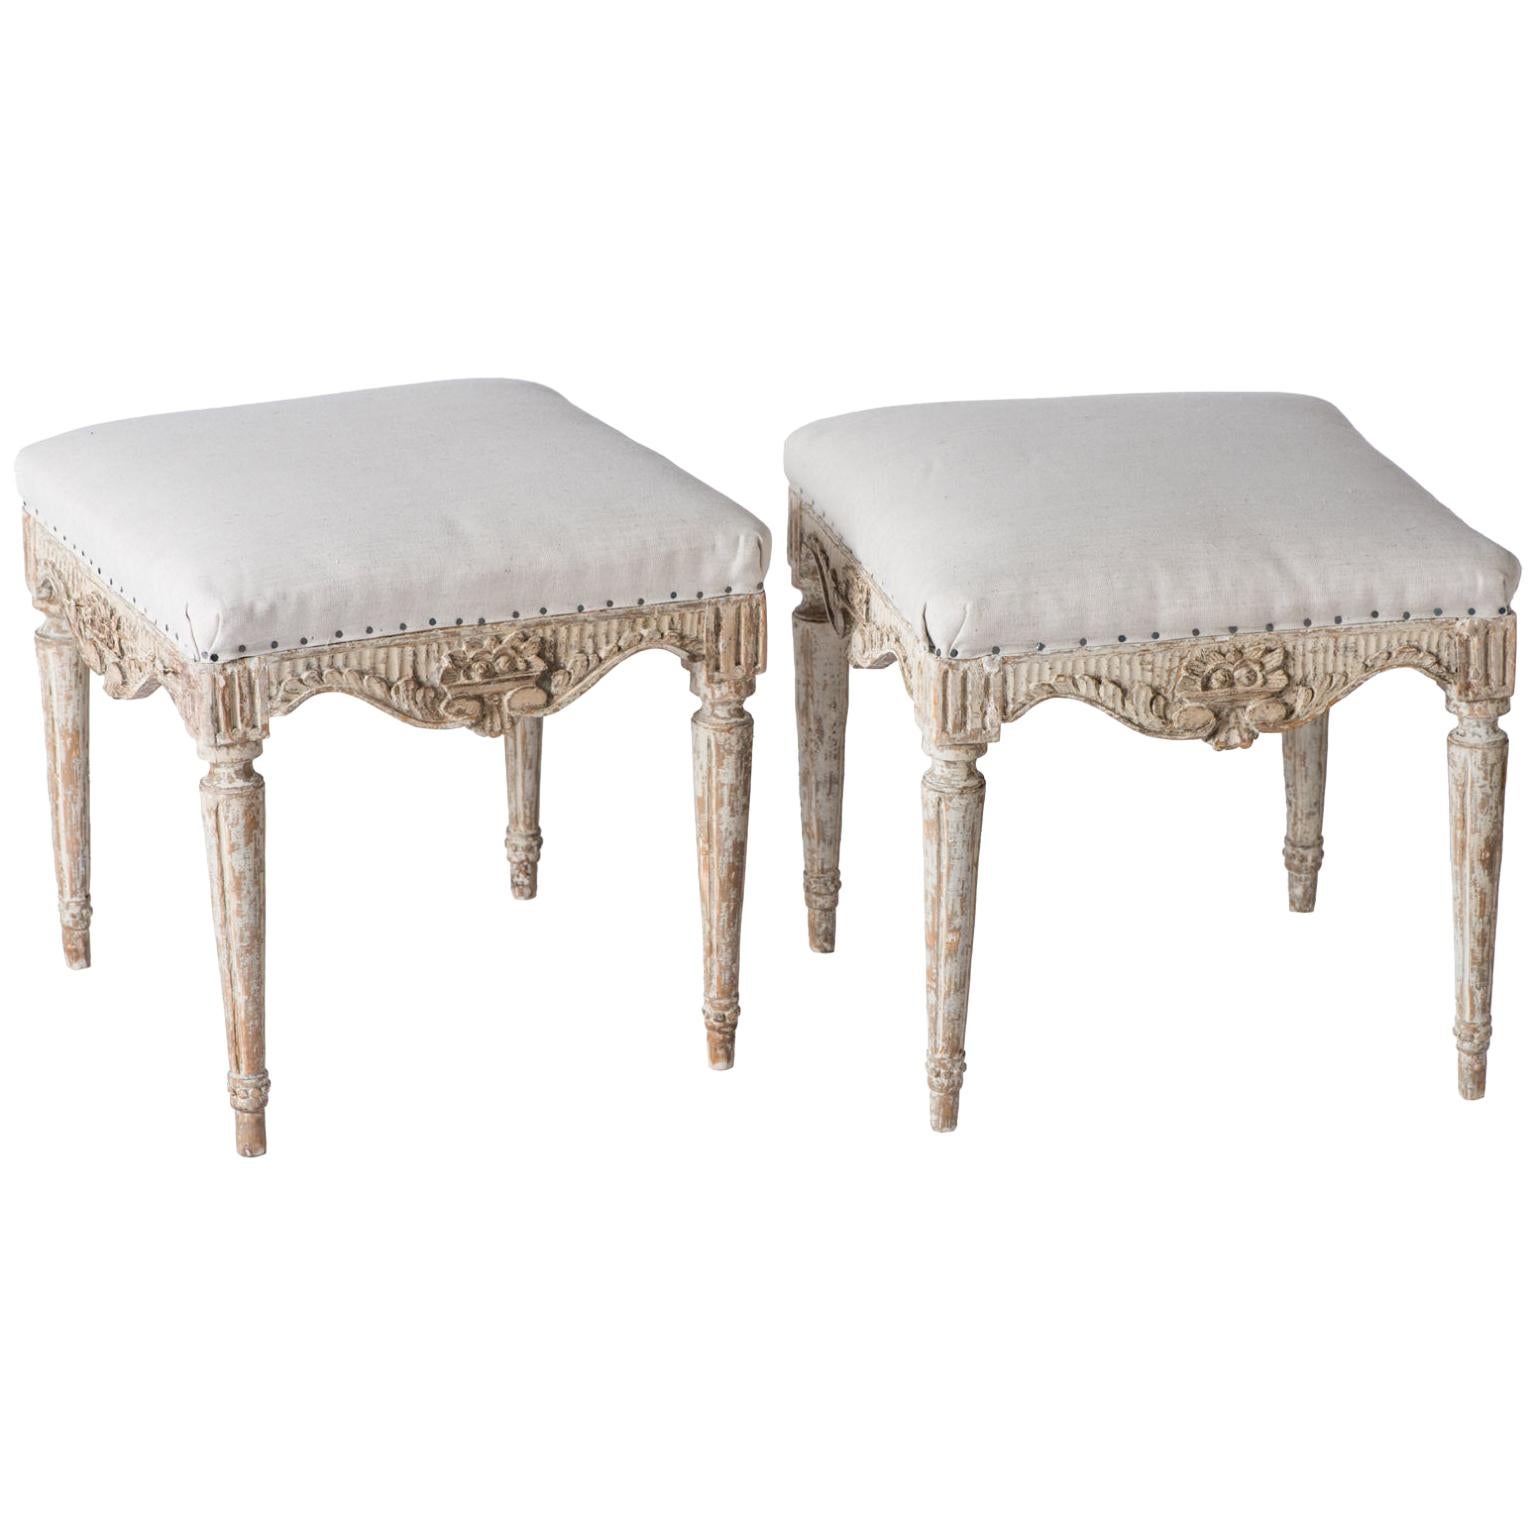 Pair of Swedish Gustavian Period Footstools, circa 1780 For Sale